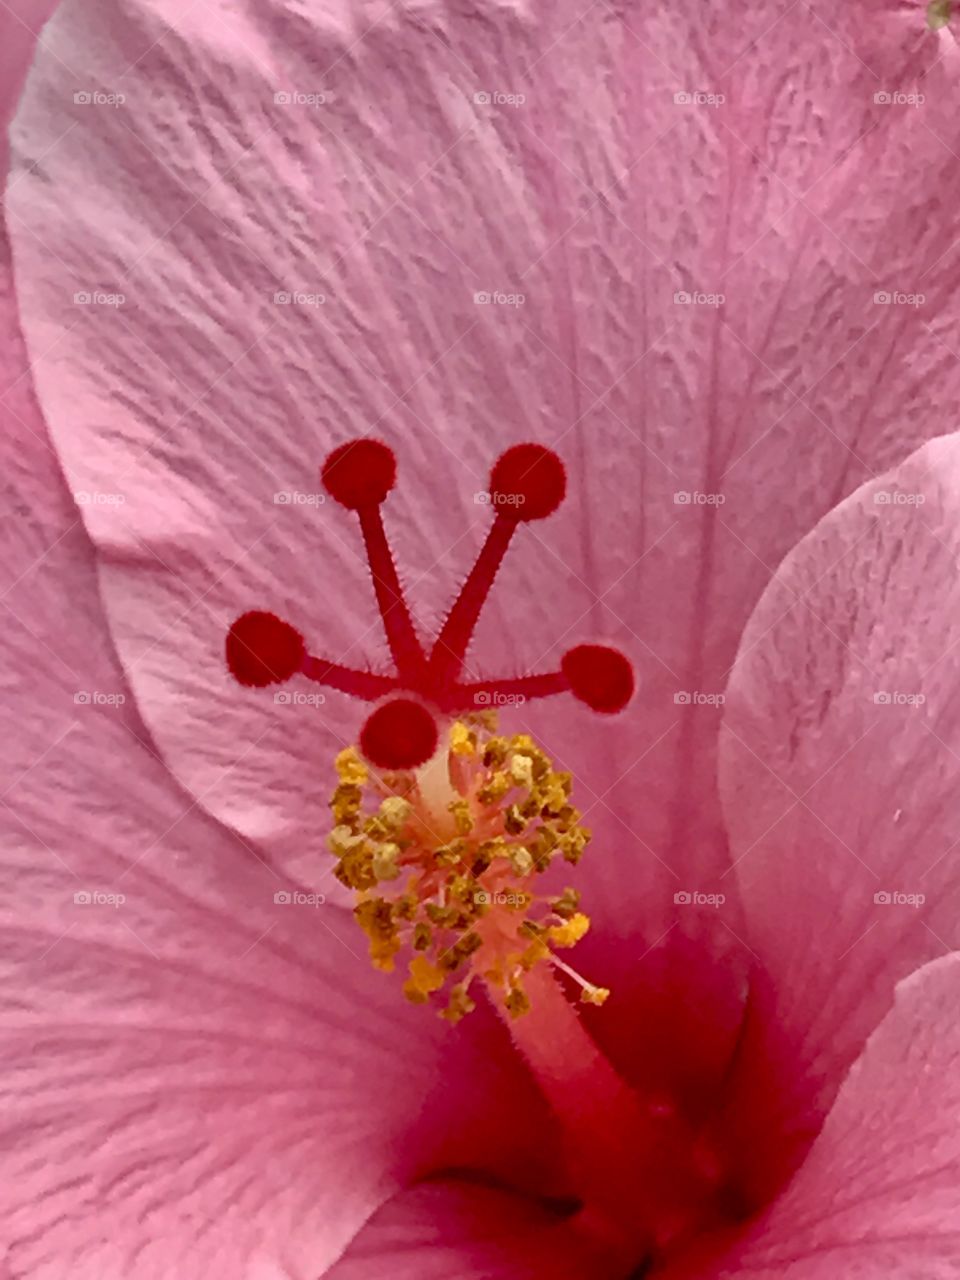 In the pink hibiscus